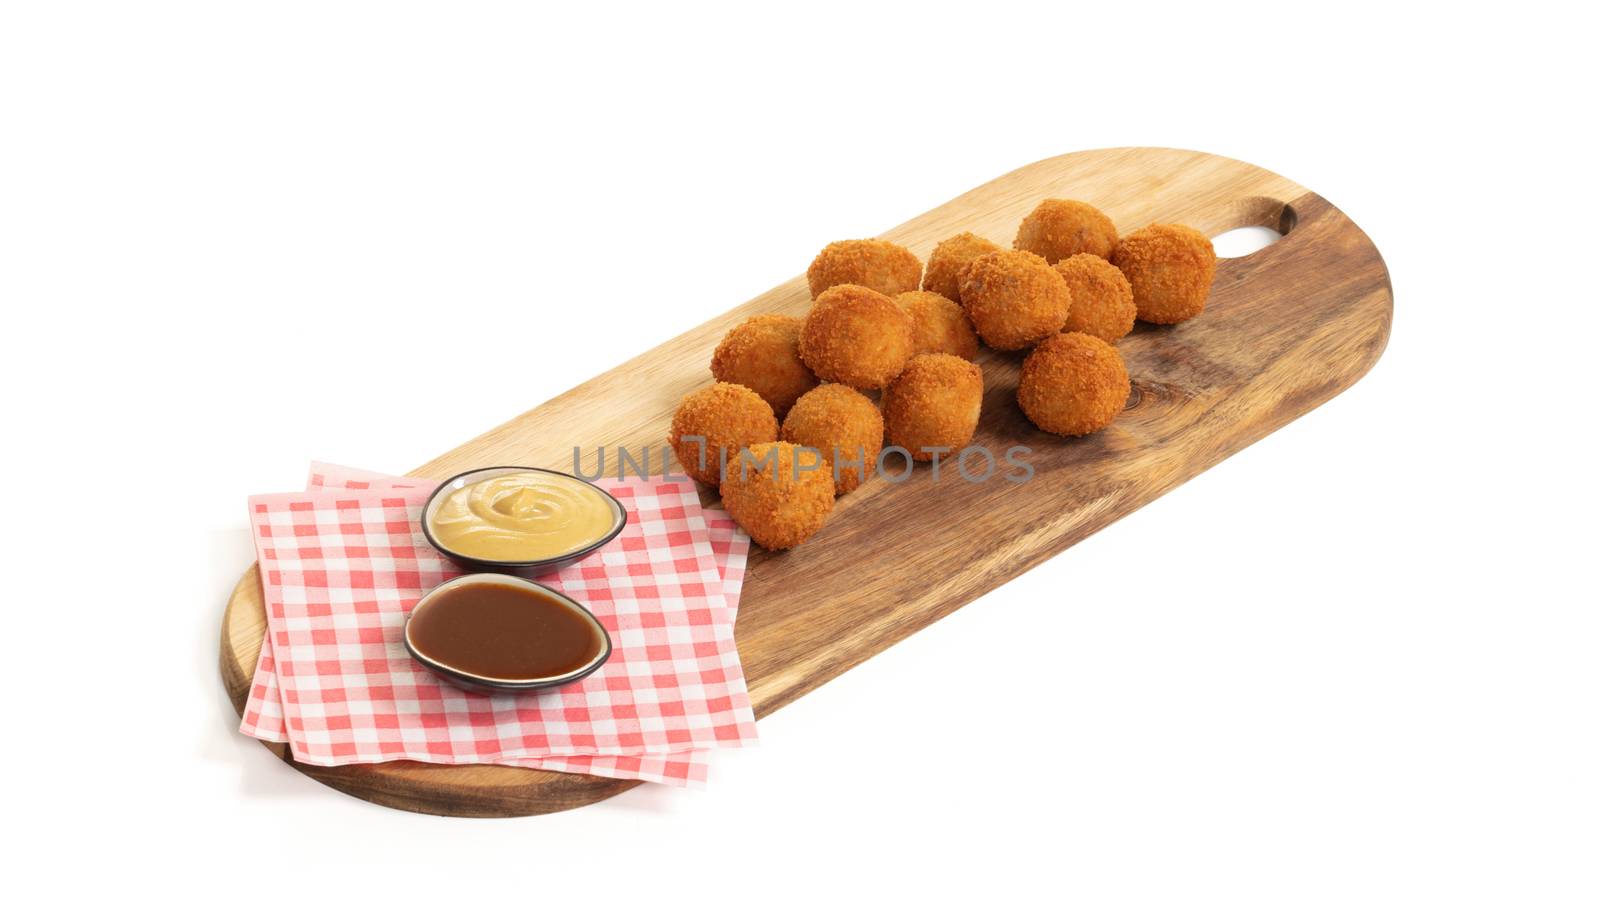 Dutch traditional snack bitterbal on a serving board by michaklootwijk